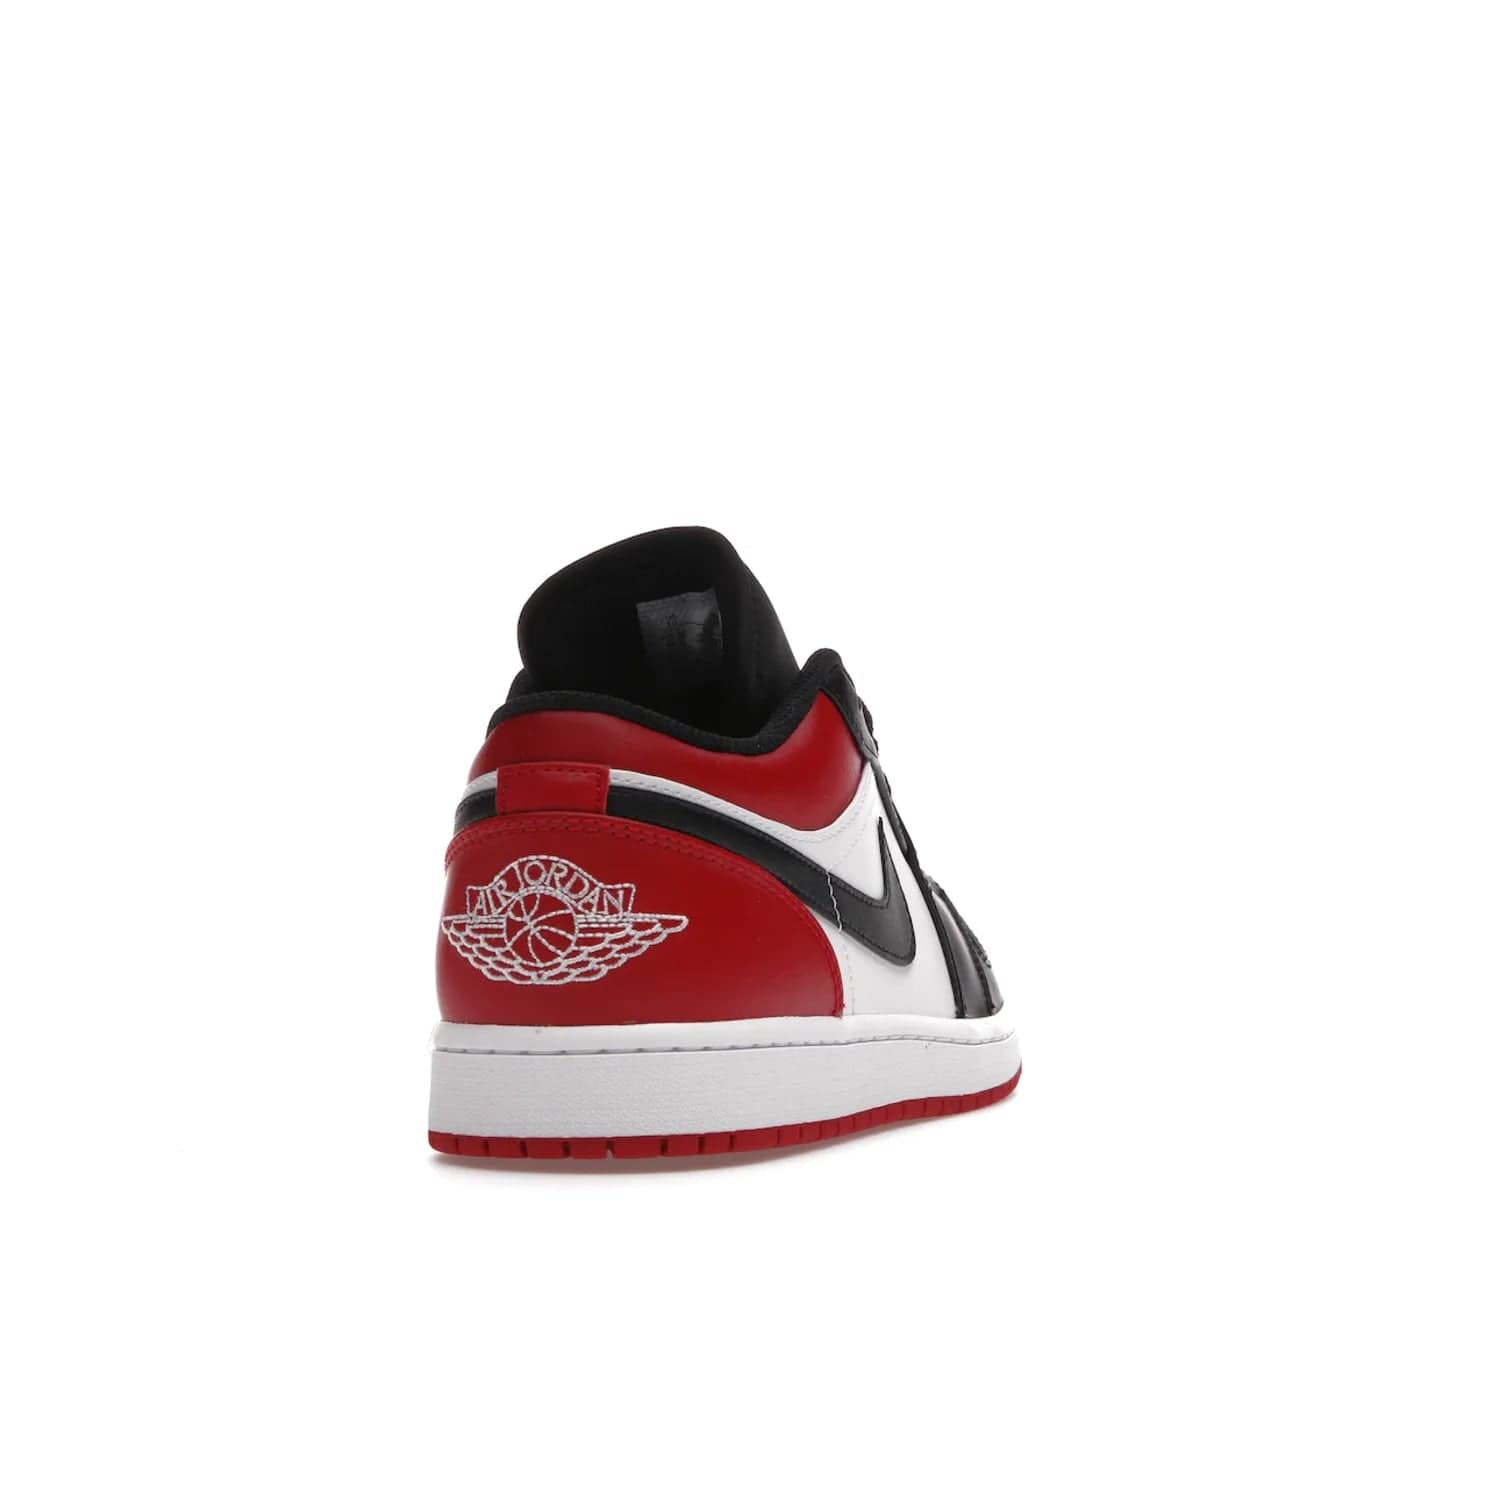 Jordan 1 Low Bred Toe - Image 30 - Only at www.BallersClubKickz.com - Step into the iconic Jordan 1 Retro. Mixing and matching of leather in red, black, and white makes for a unique colorway. Finished off with a Wing logo embroidery & Jumpman label. Comfortable and stylish at an affordable $100, the Jordan 1 Low Bred Toe is perfect for any true sneaker fan.